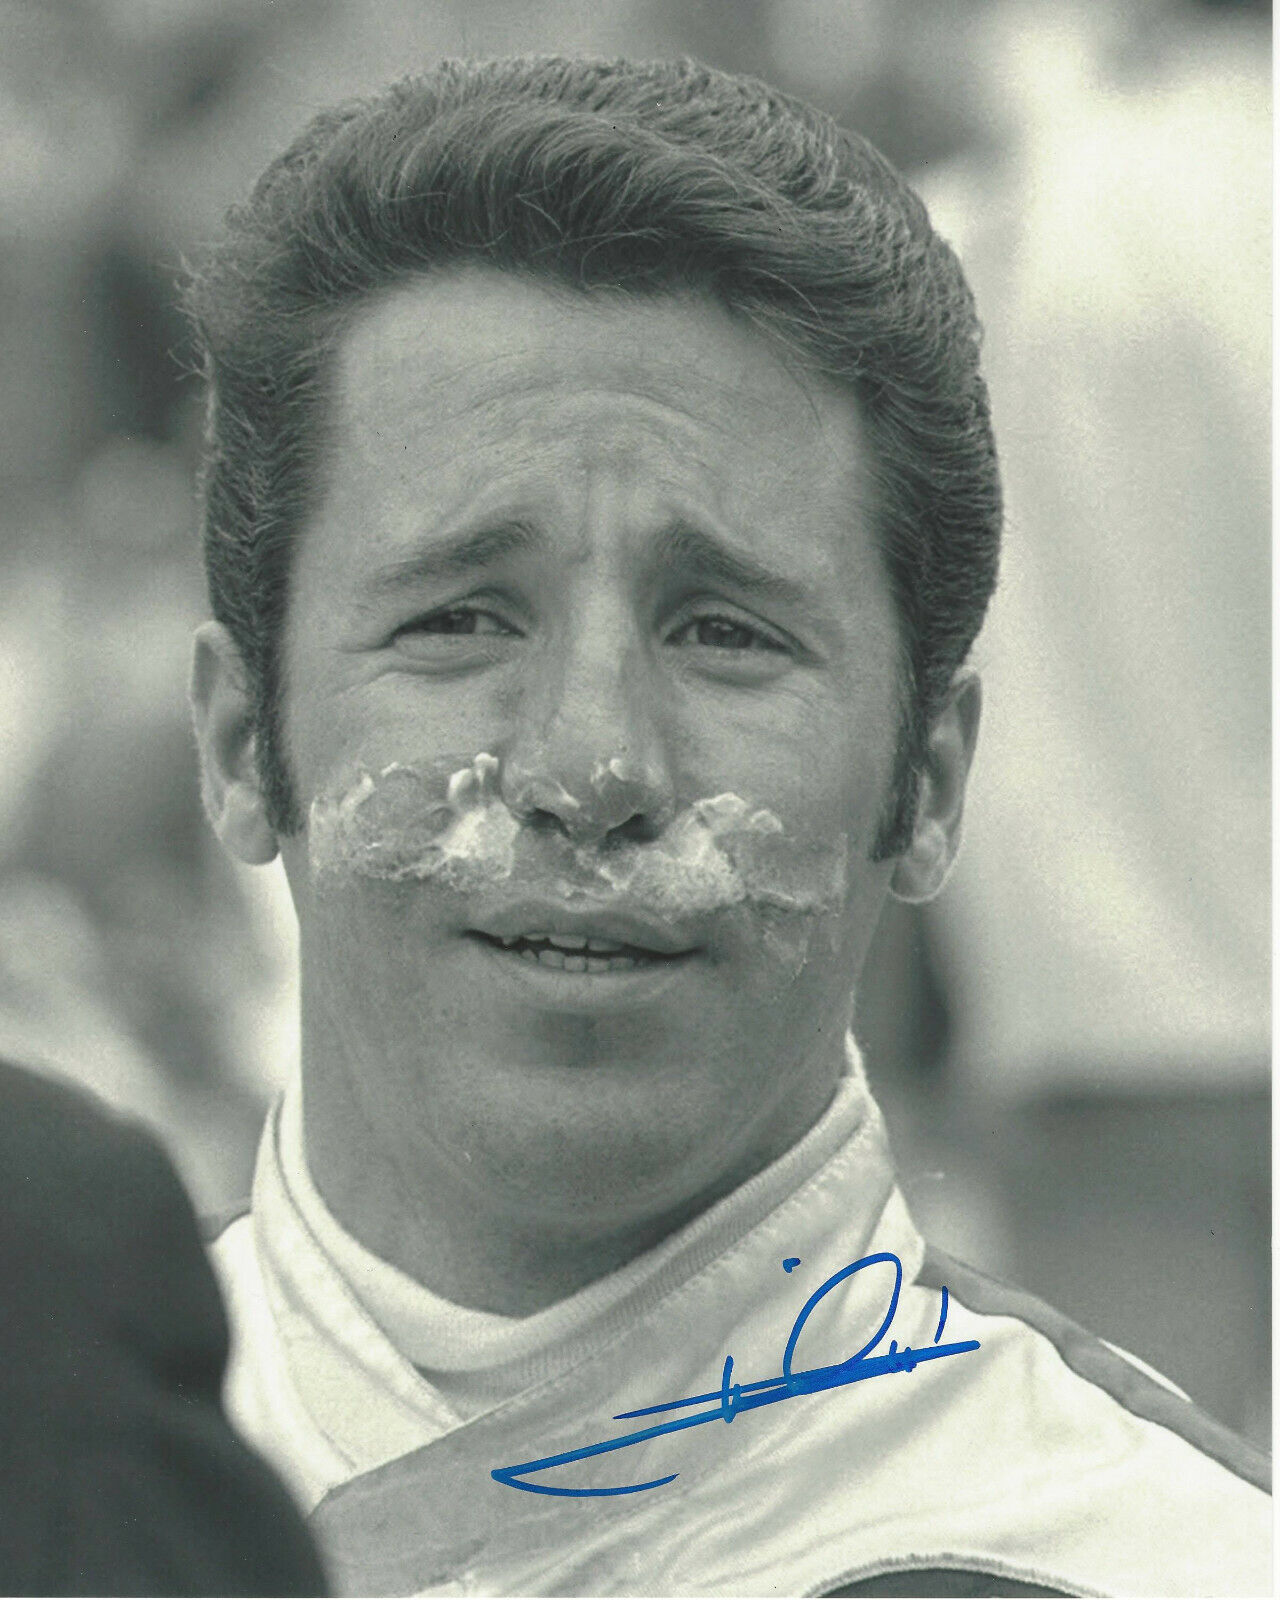 MARIO ANDRETTI INDY CAR DRIVER SIGNED 8x10 Photo Poster painting INDIANAPOLIS 500 CHAMPION COA